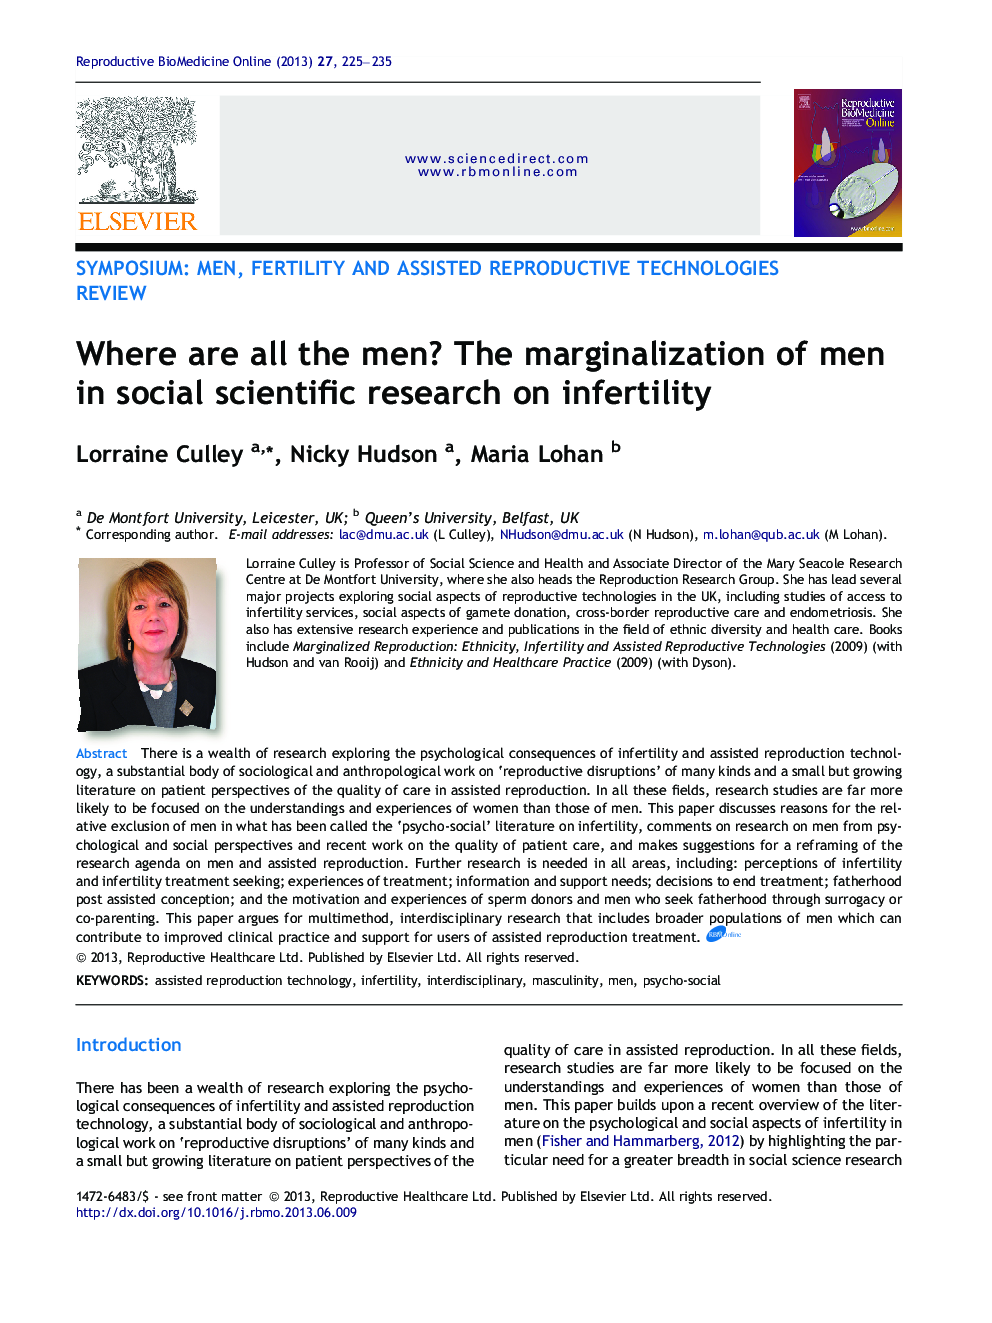 Where are all the men? The marginalization of men in social scientific research on infertility 